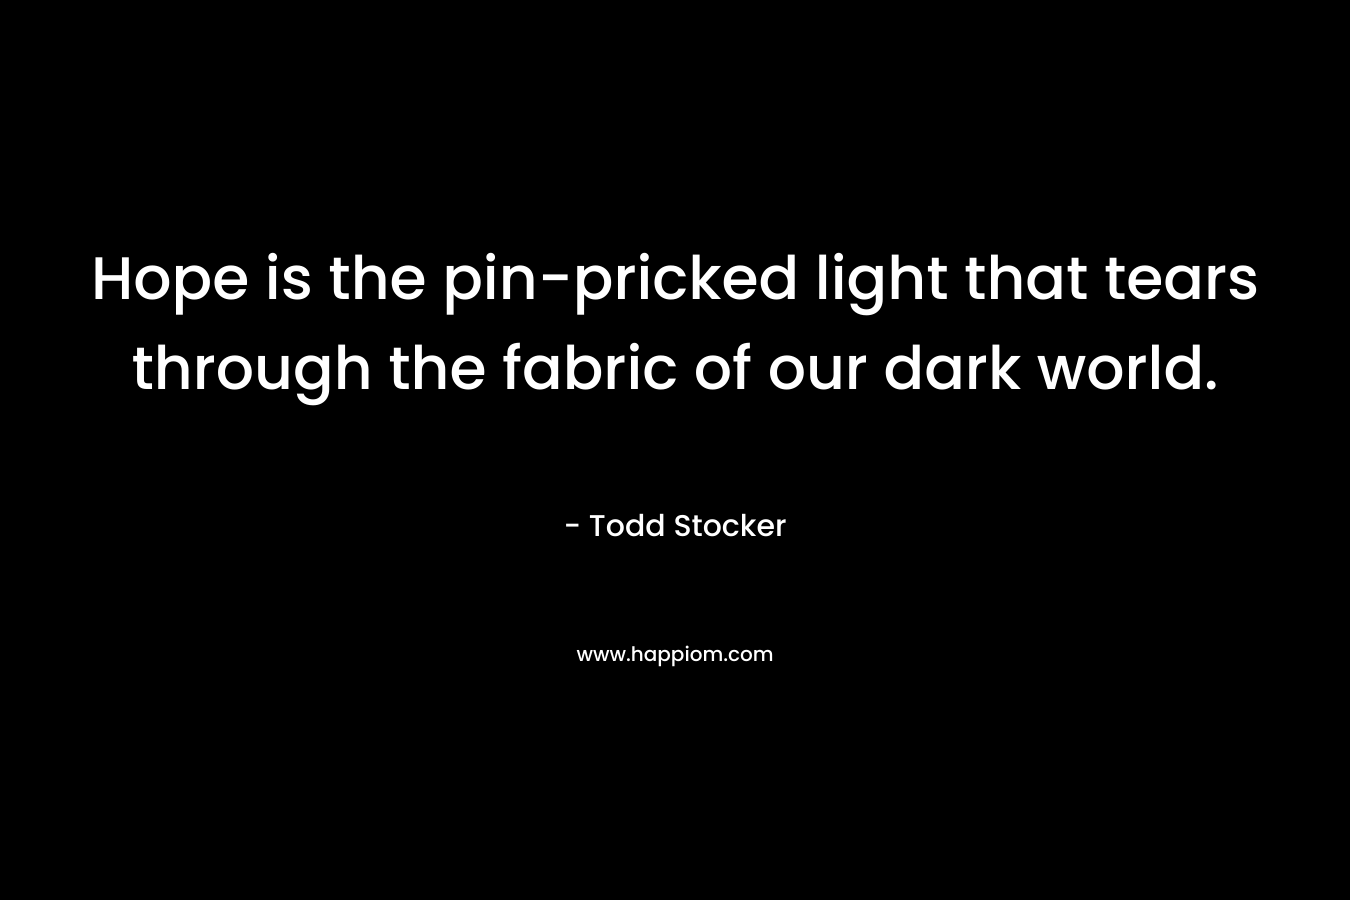 Hope is the pin-pricked light that tears through the fabric of our dark world. – Todd Stocker